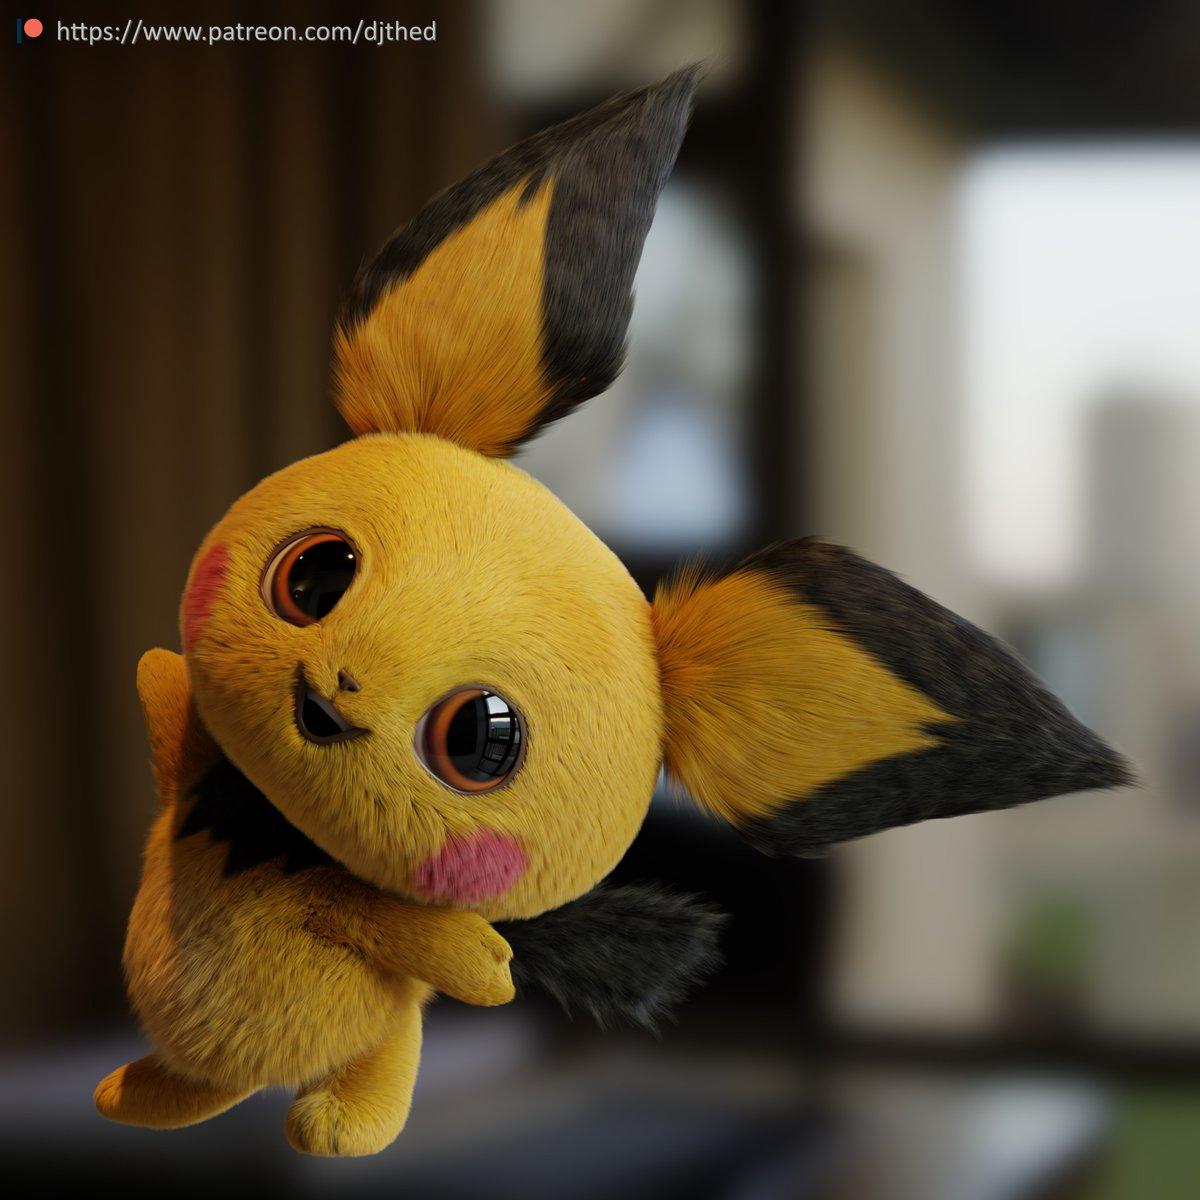 How Pichu would look in Pokemon Detective Pikachu